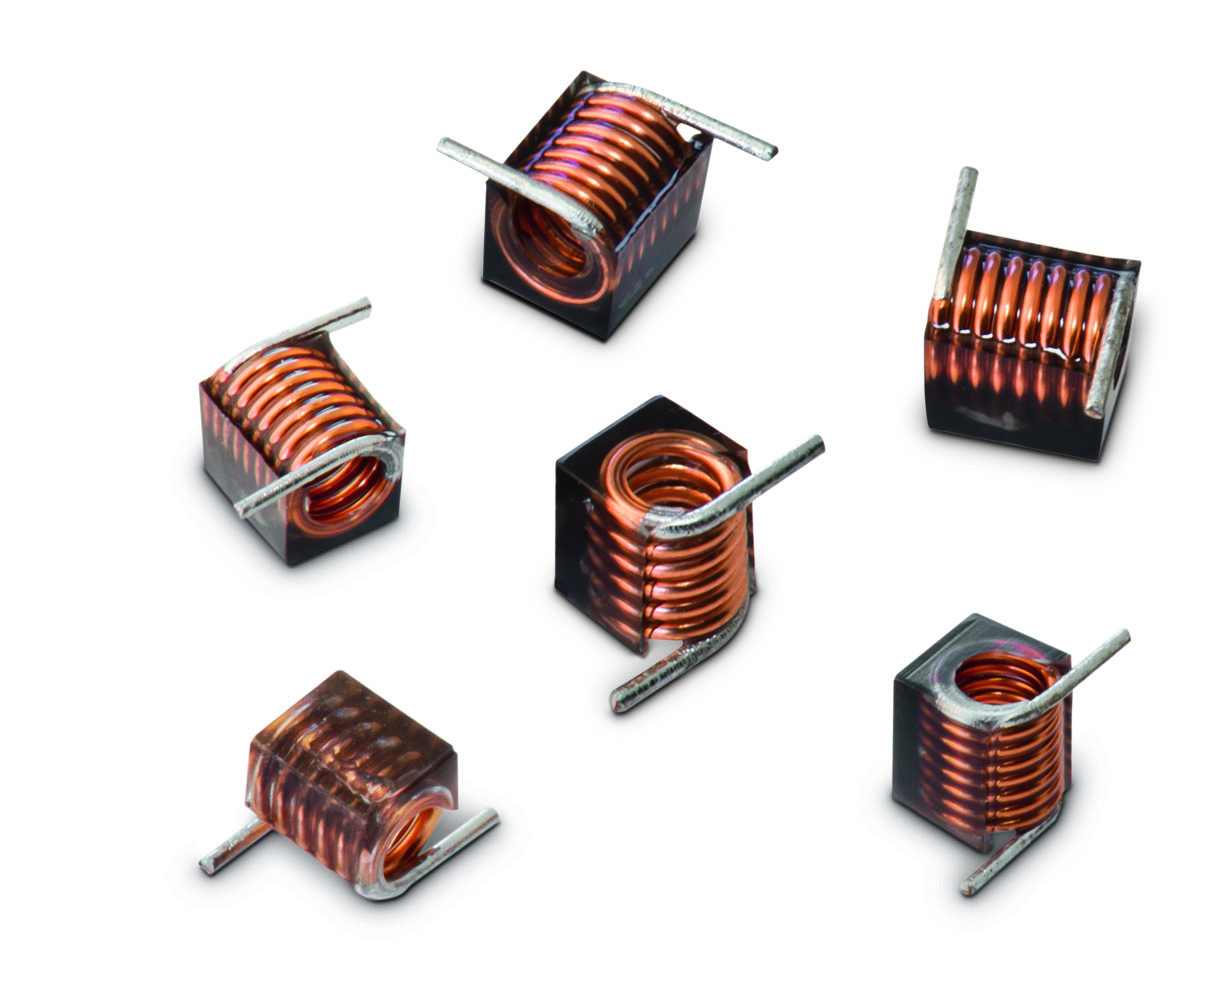 Wuerth's SMD air coils target high-frequency apps